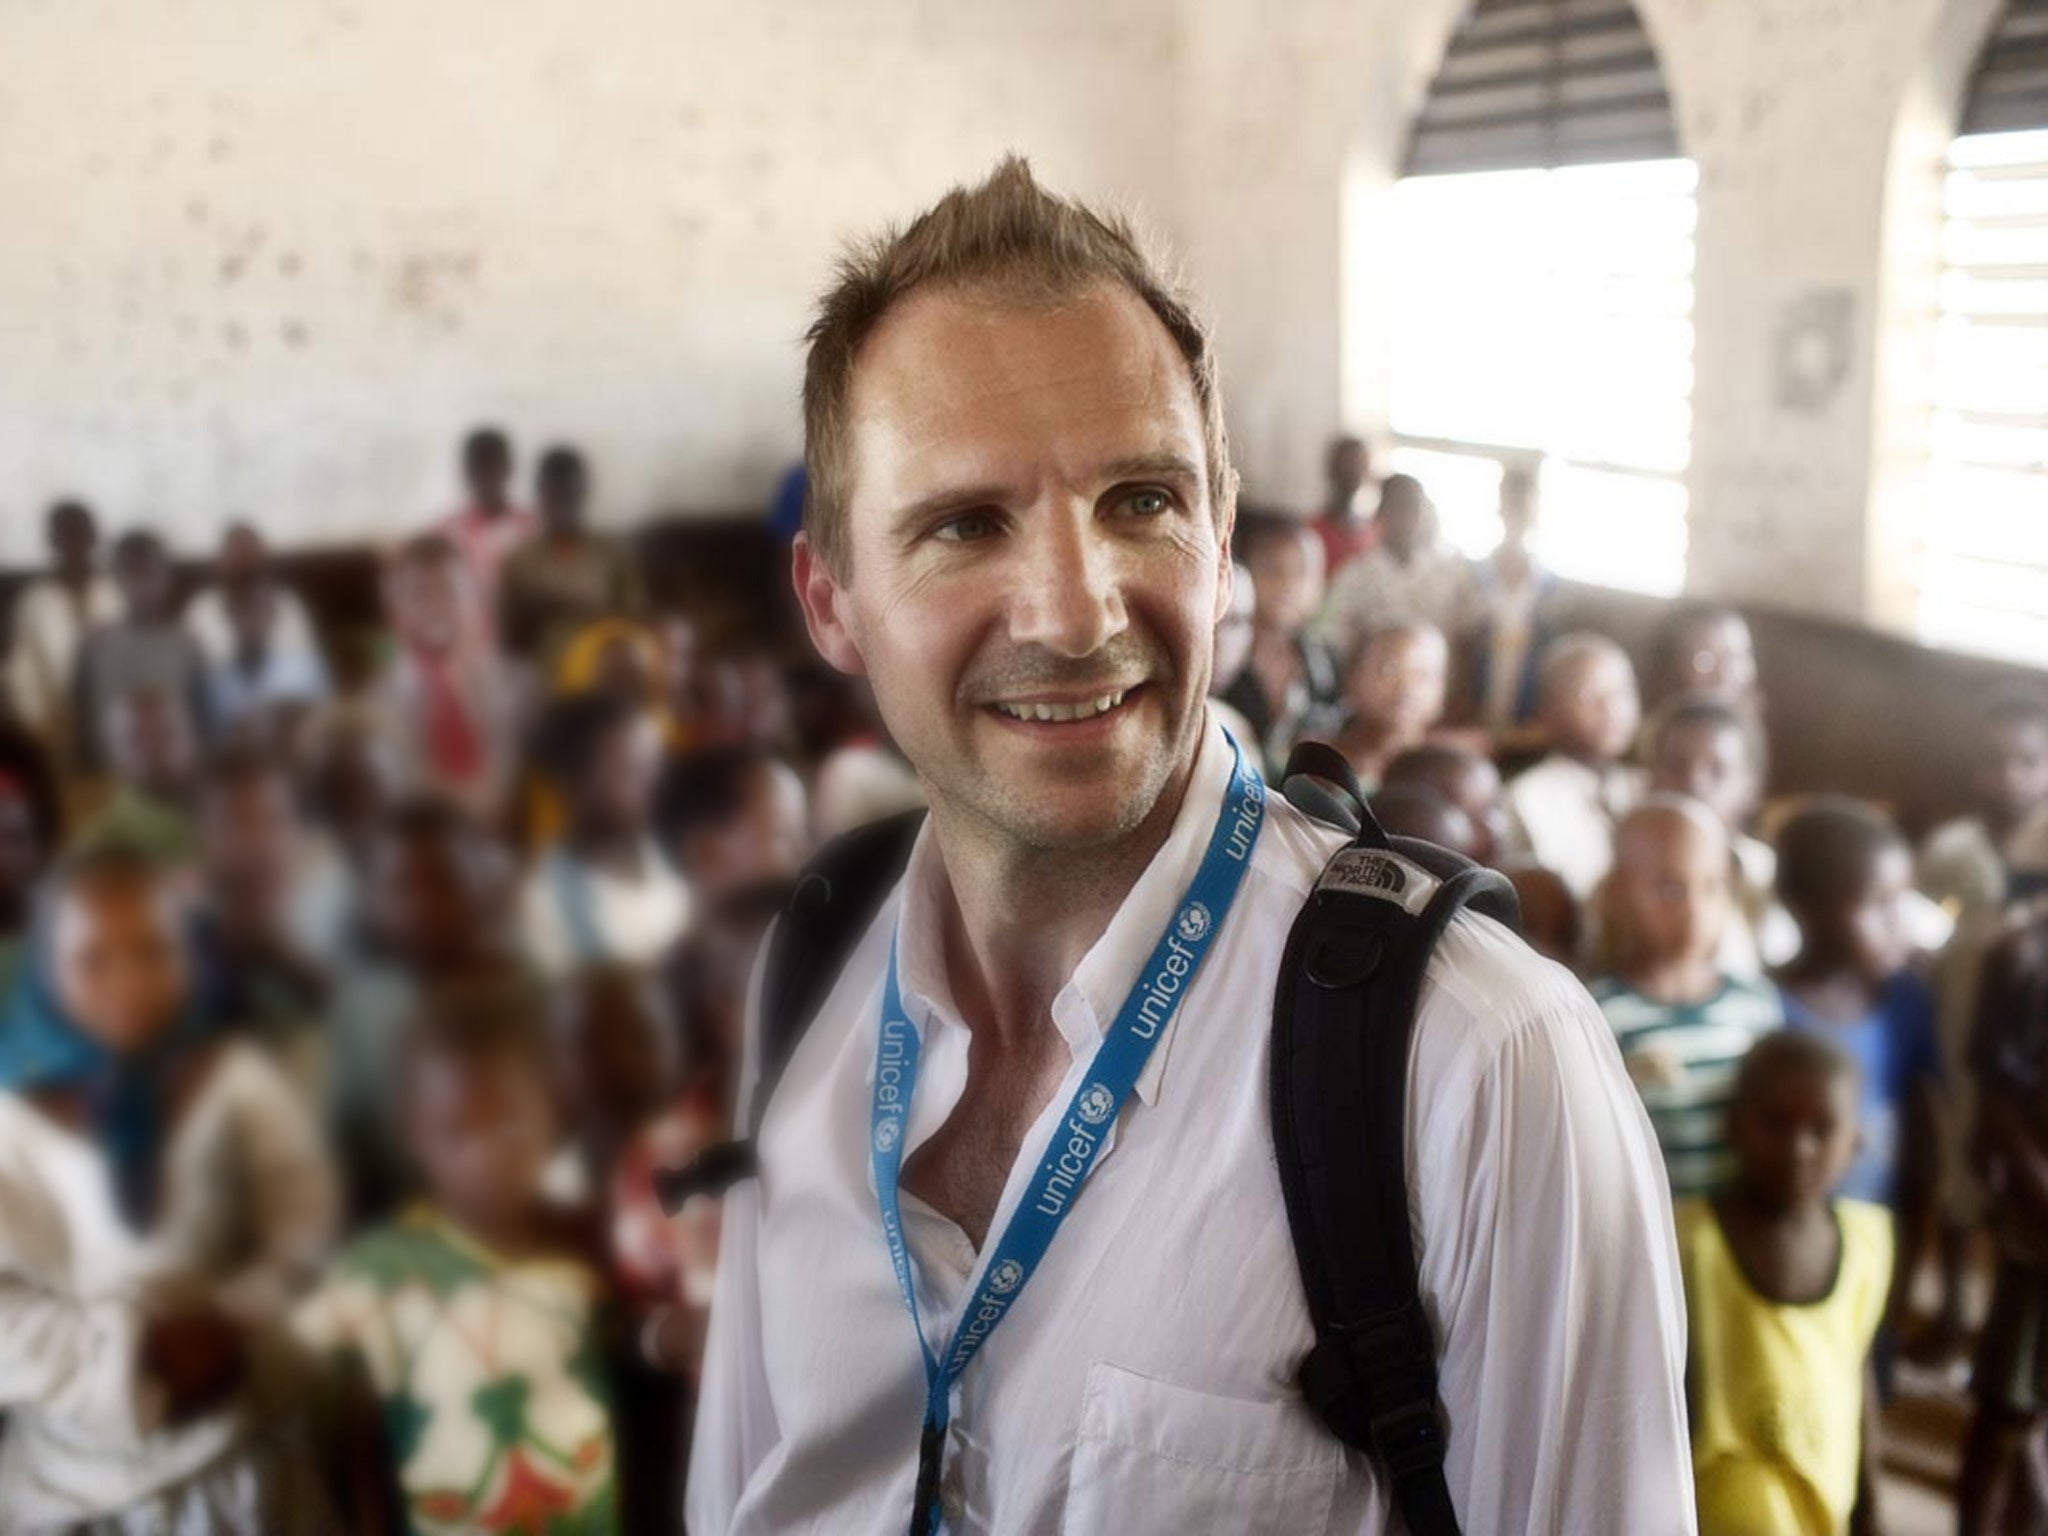 The actor Ralph Fiennes meets school children at a Unicef-supported school in Chad during a visit in 2009